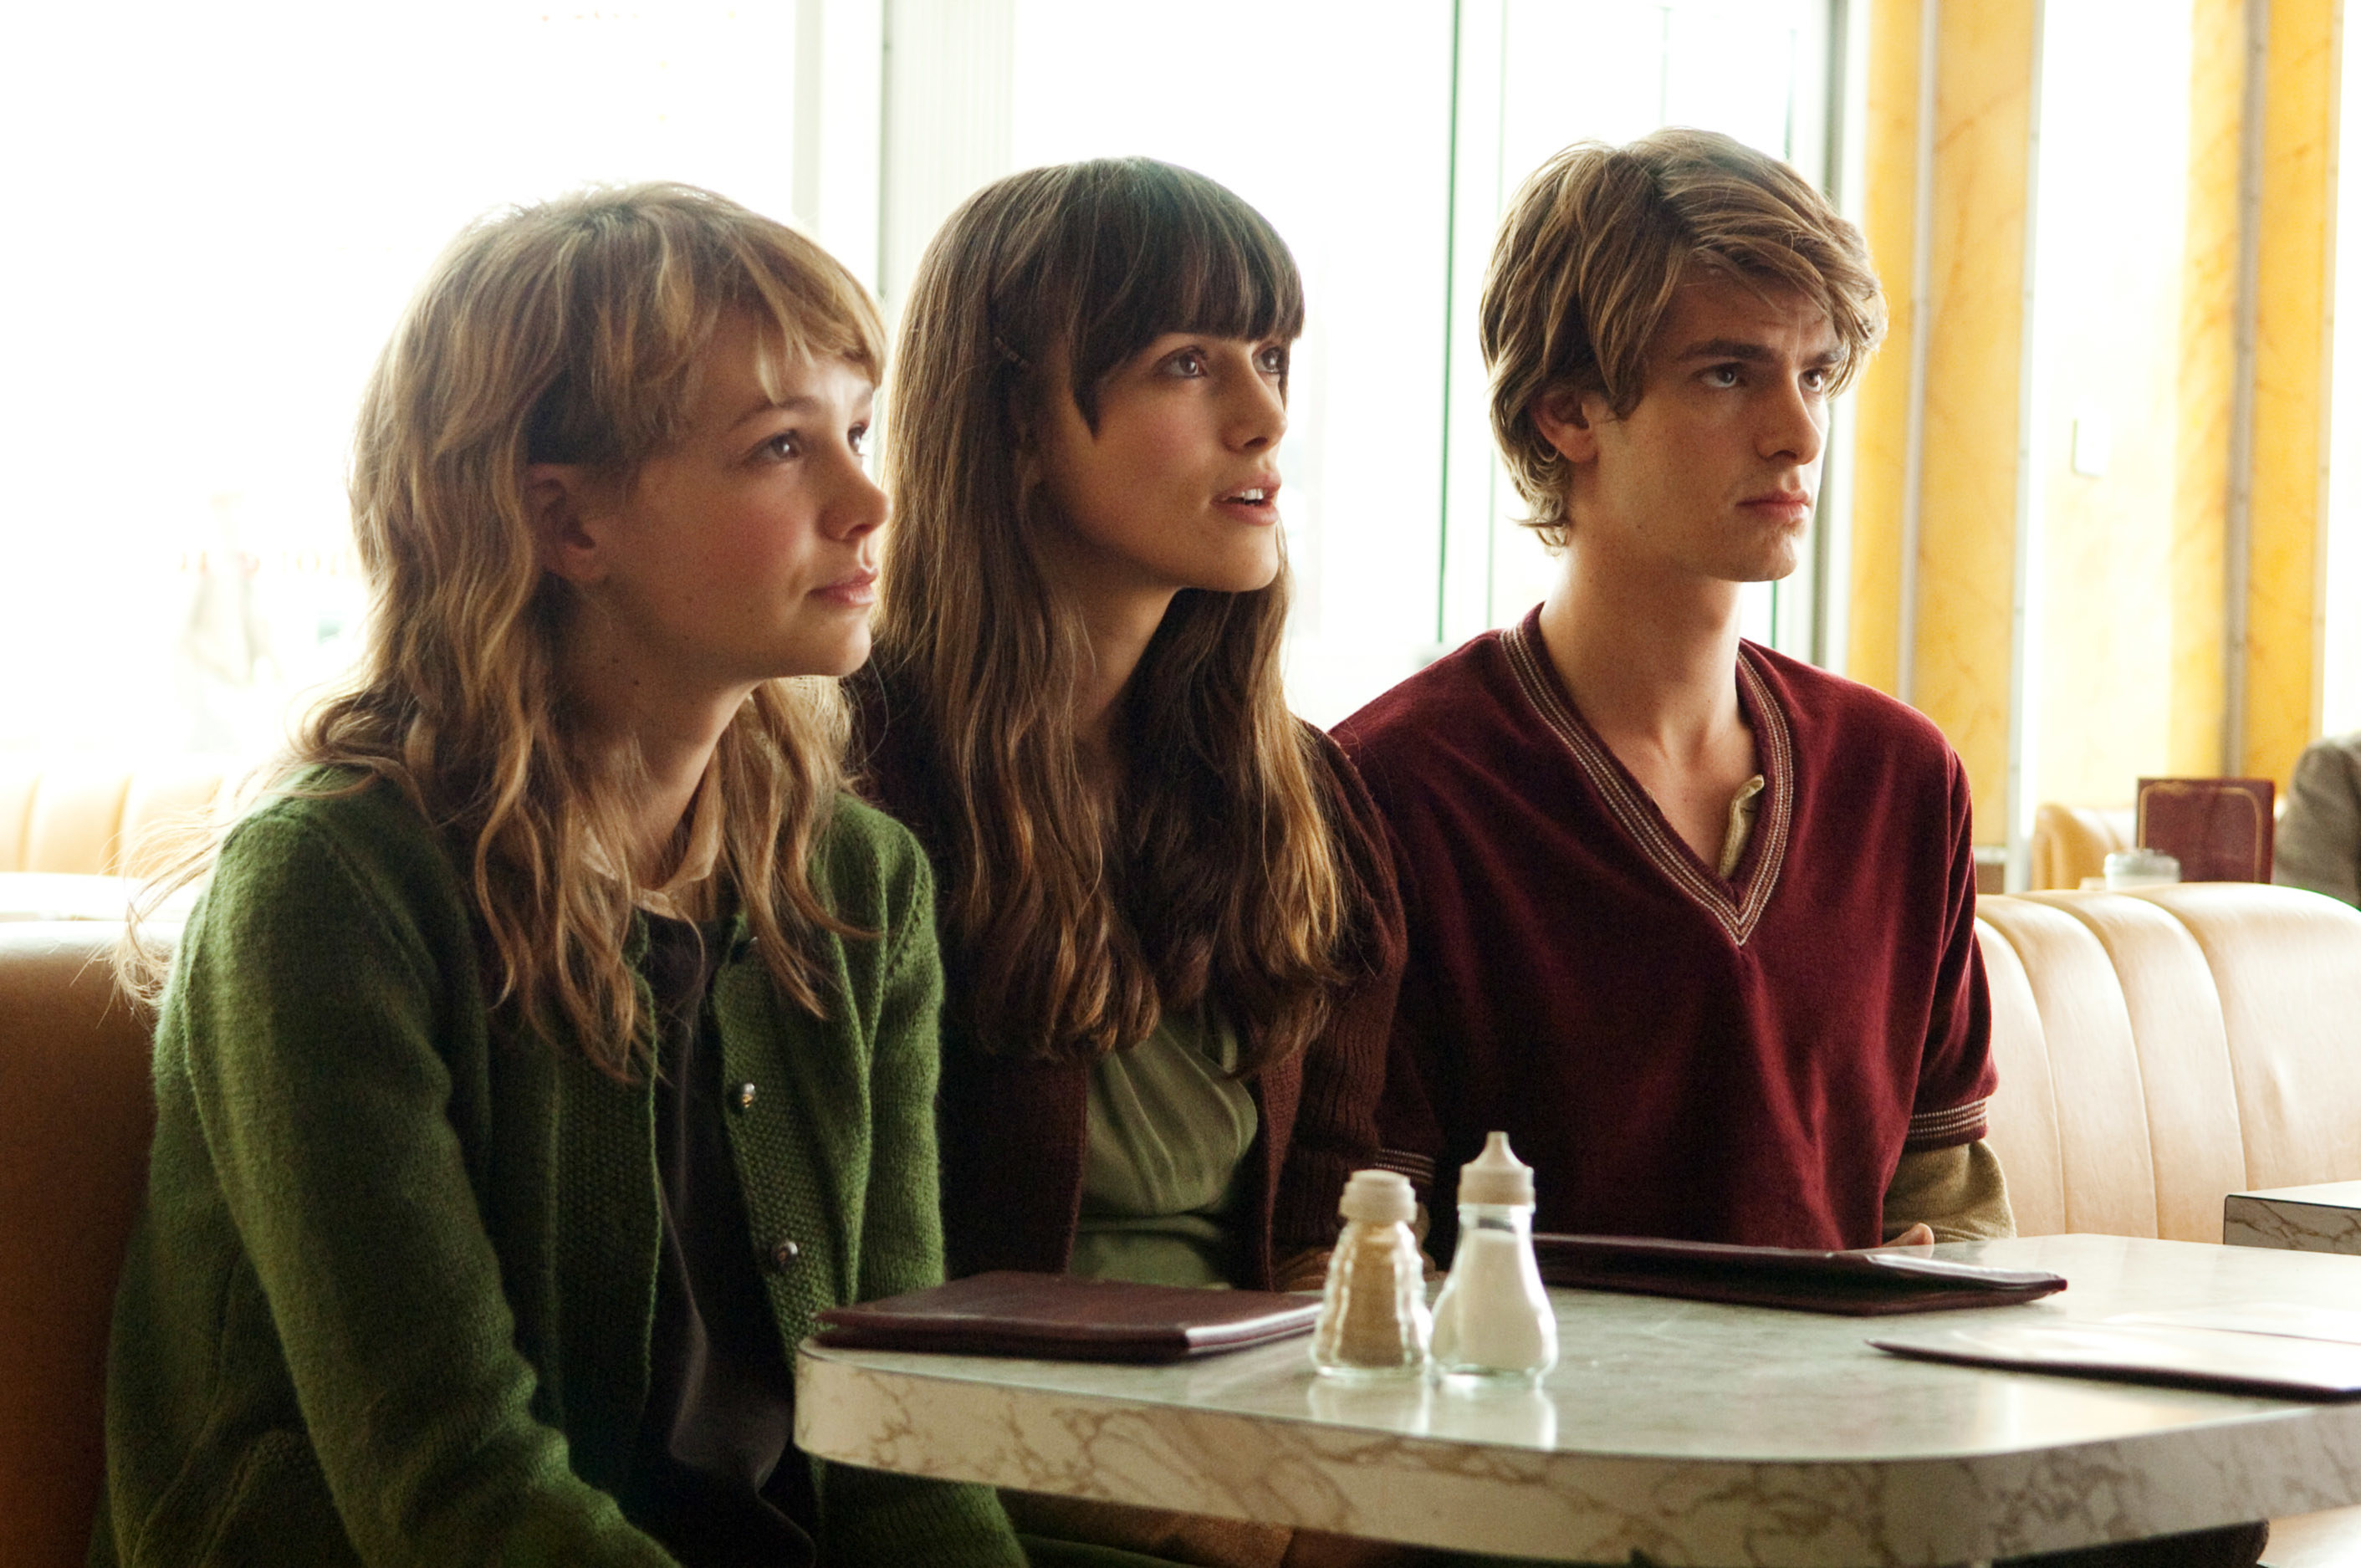 Carey Mulligan, Keira Knightley, and Andrew Garfield sit in a booth together